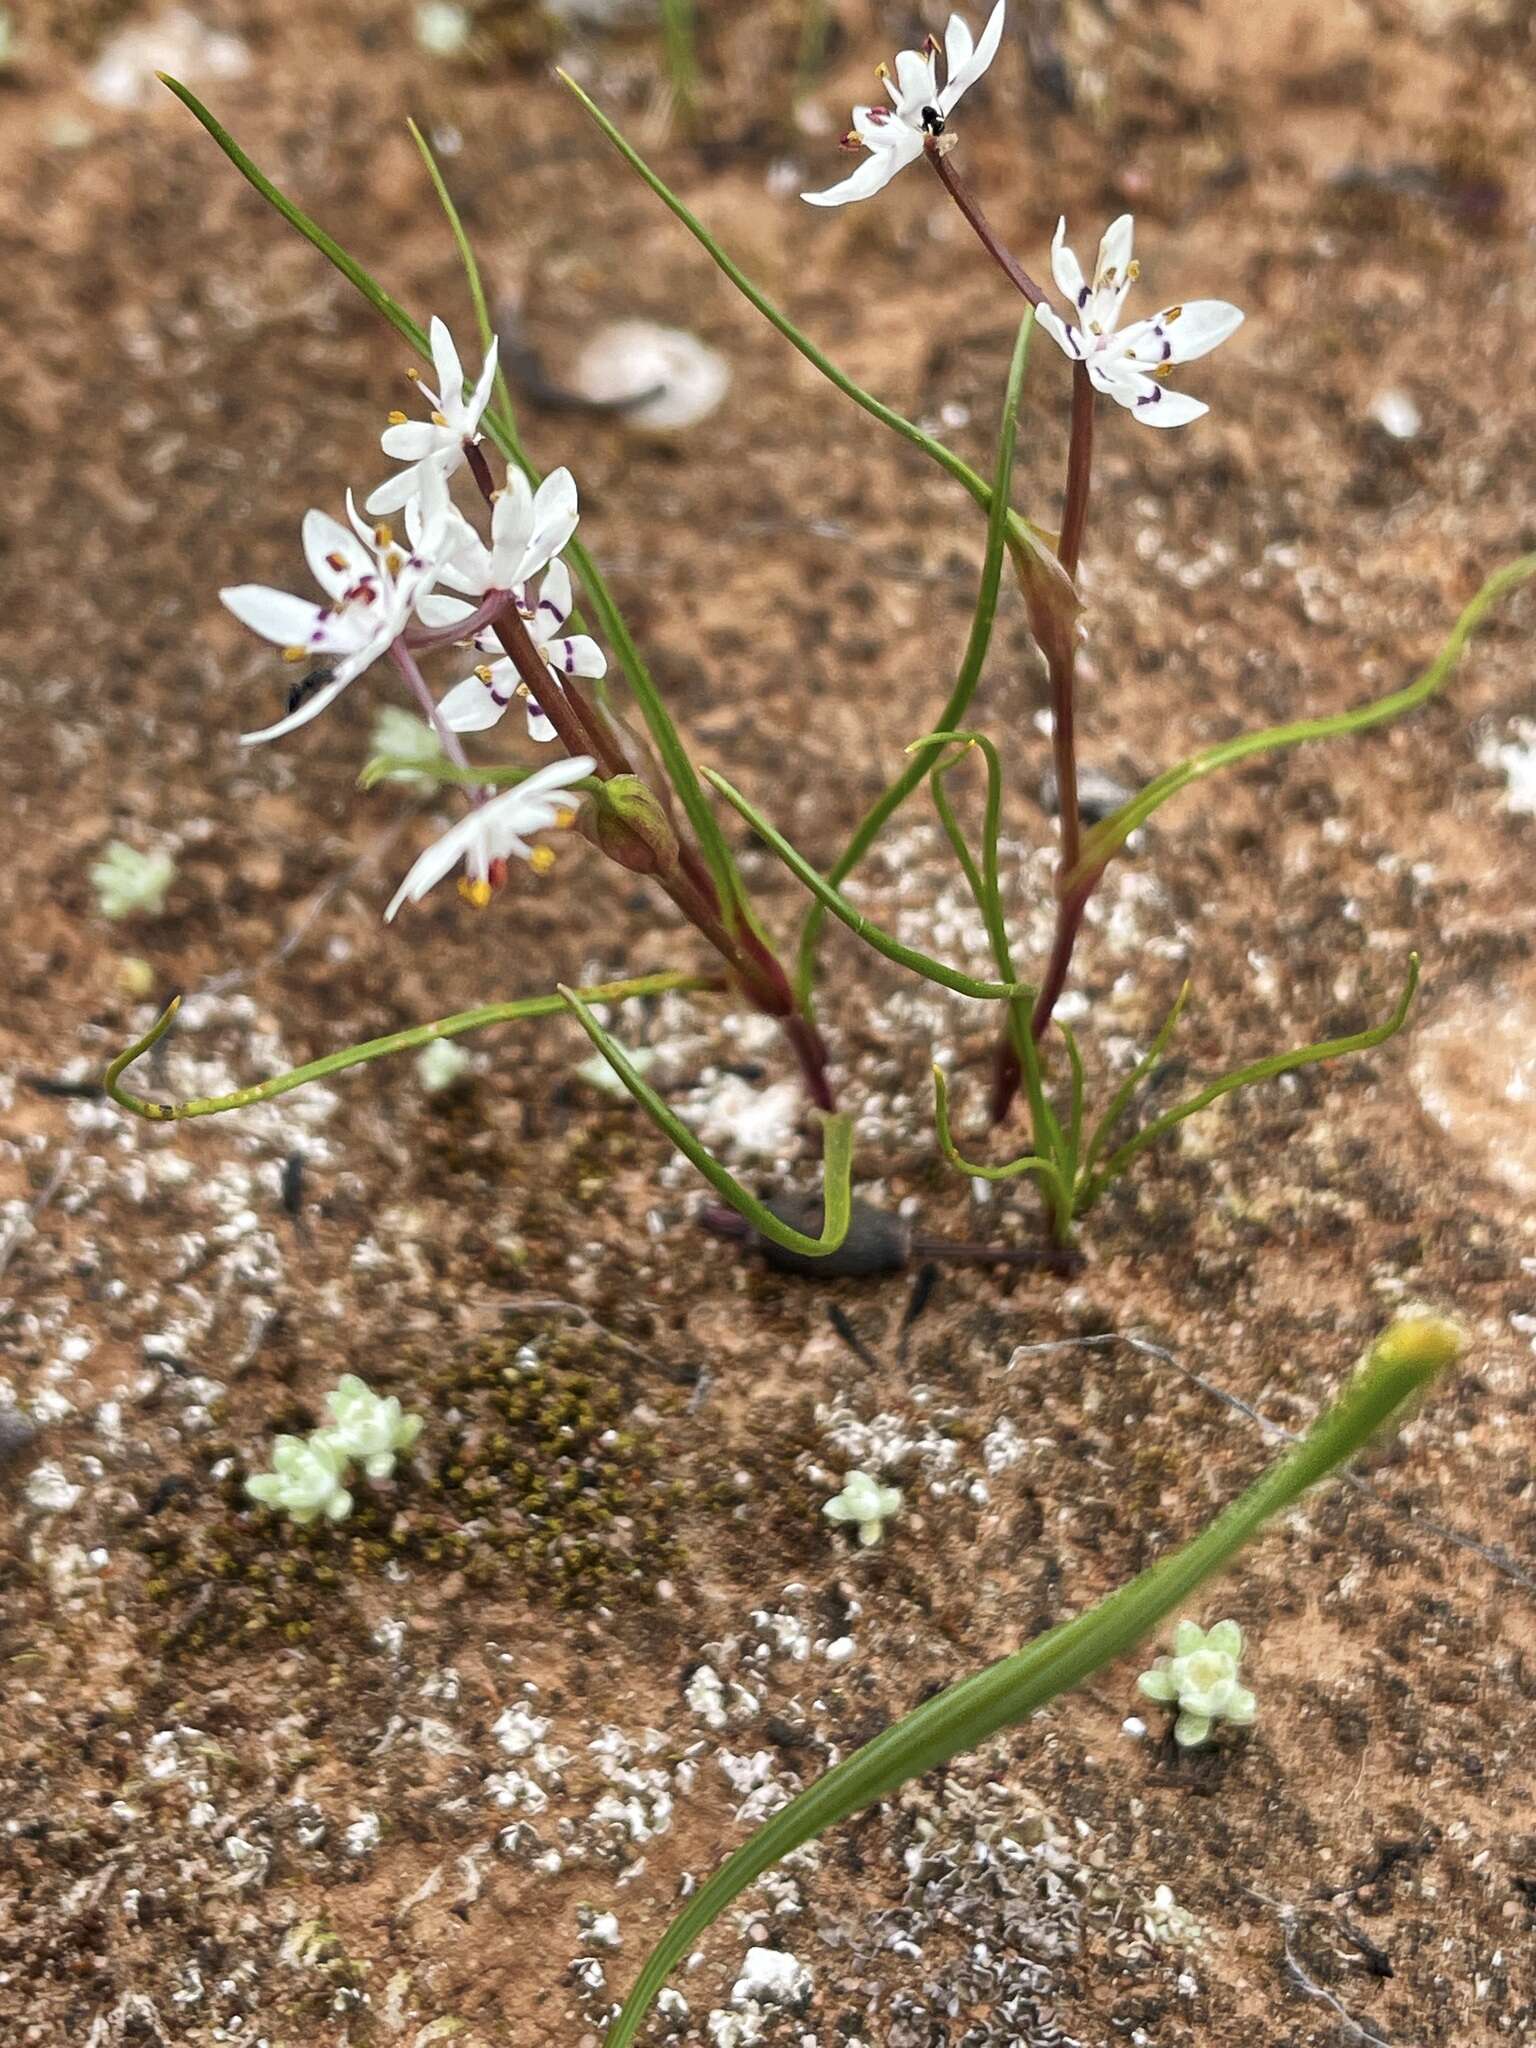 Image of Wurmbea dioica subsp. dioica